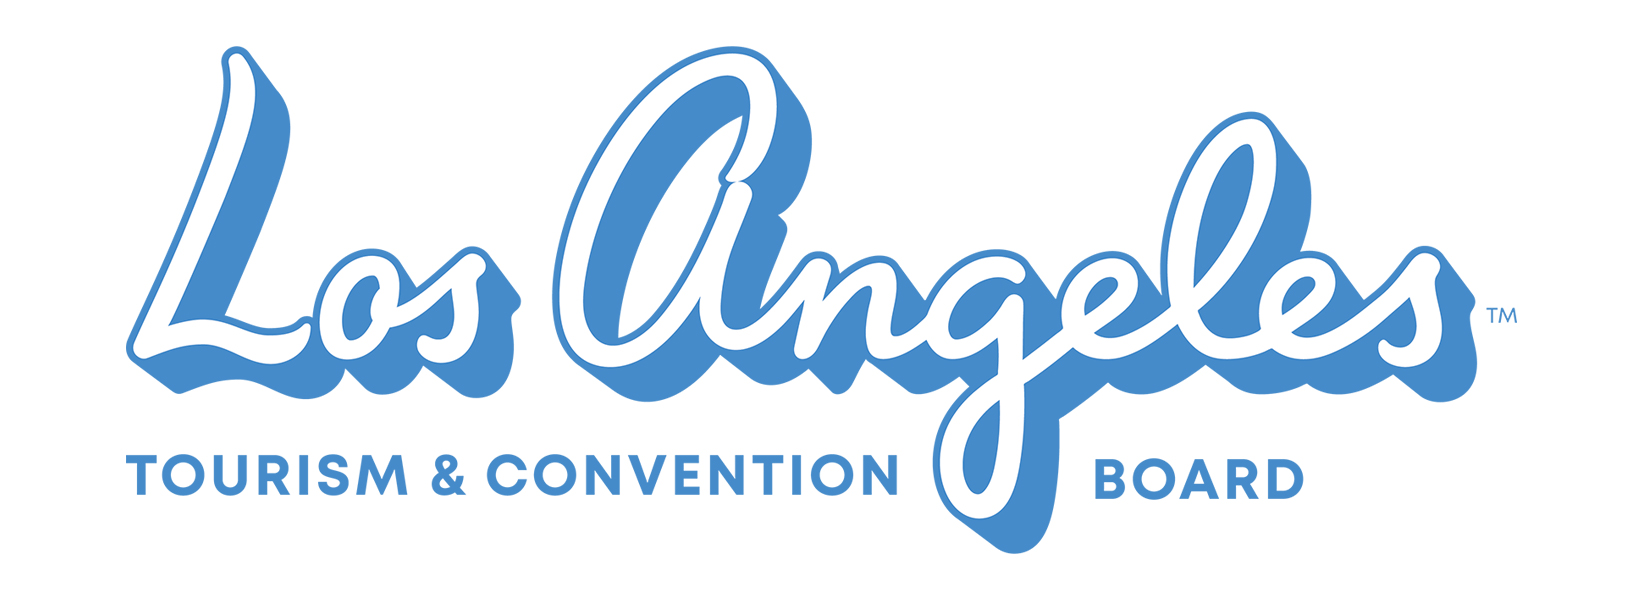 los angeles tourism & convention board logo